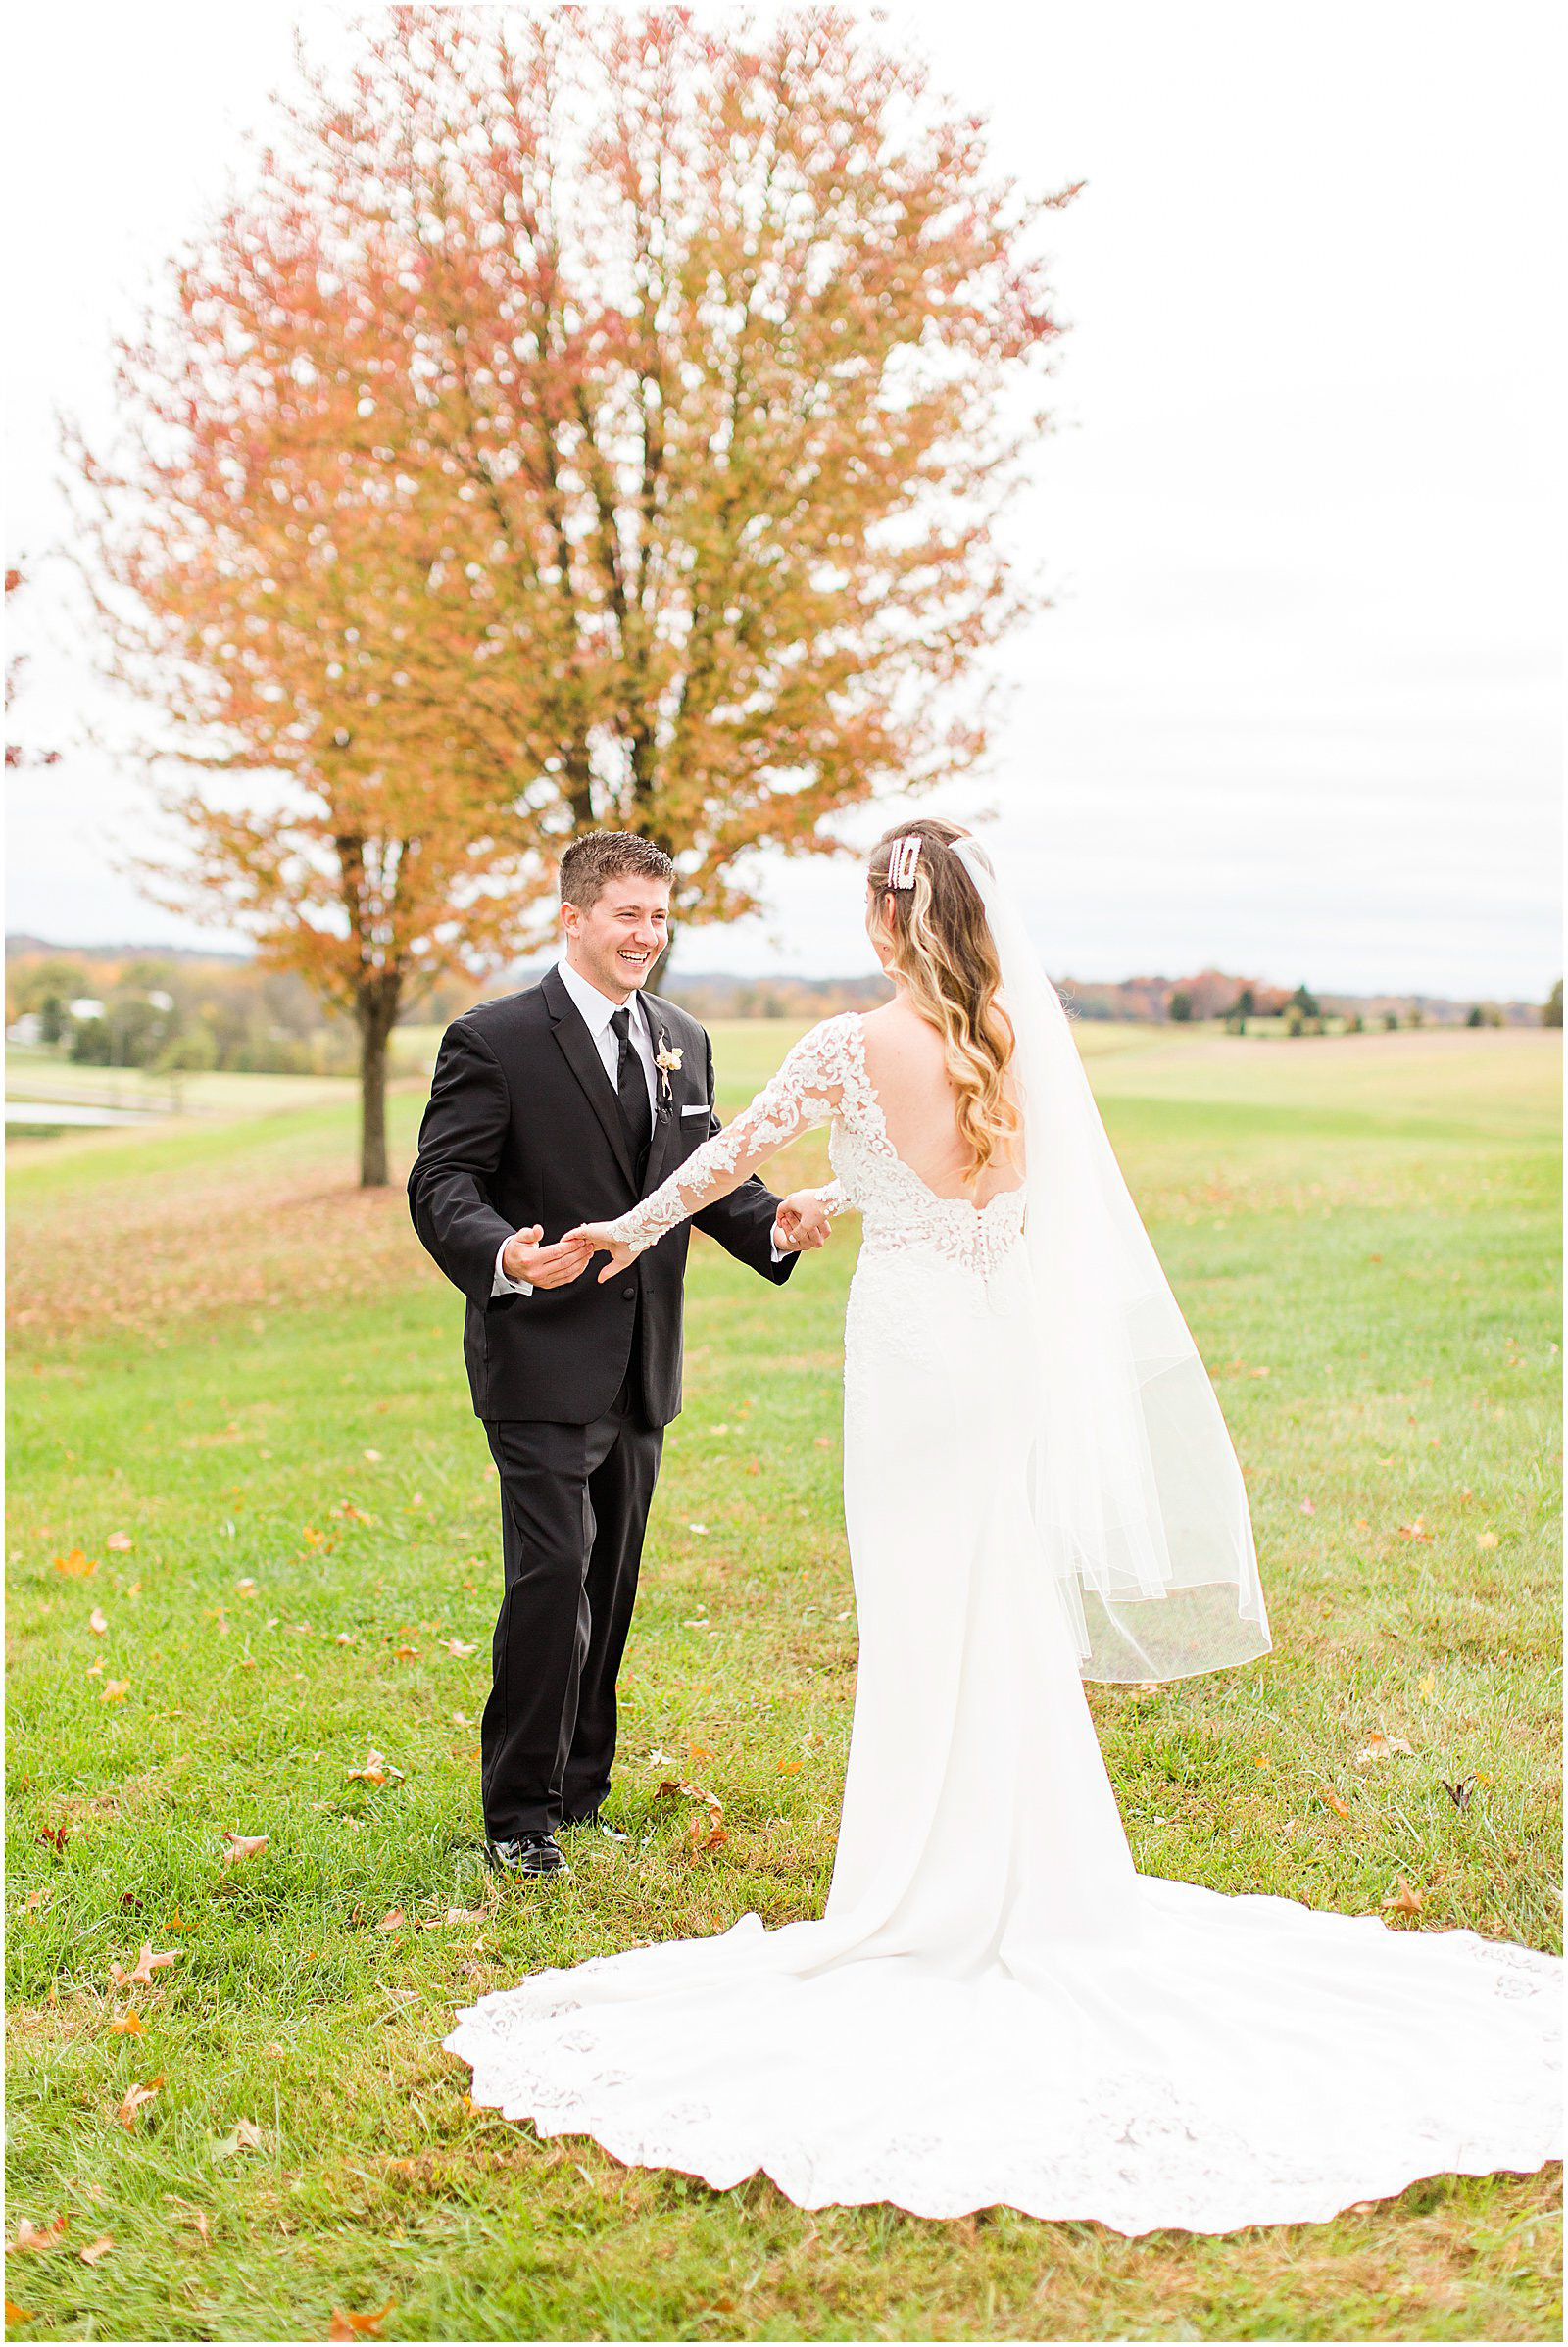 A Romantic Fall Wedding in Ferdinand, IN | Tori and Kyle | Bret and Brandie Photography 0051.jpg